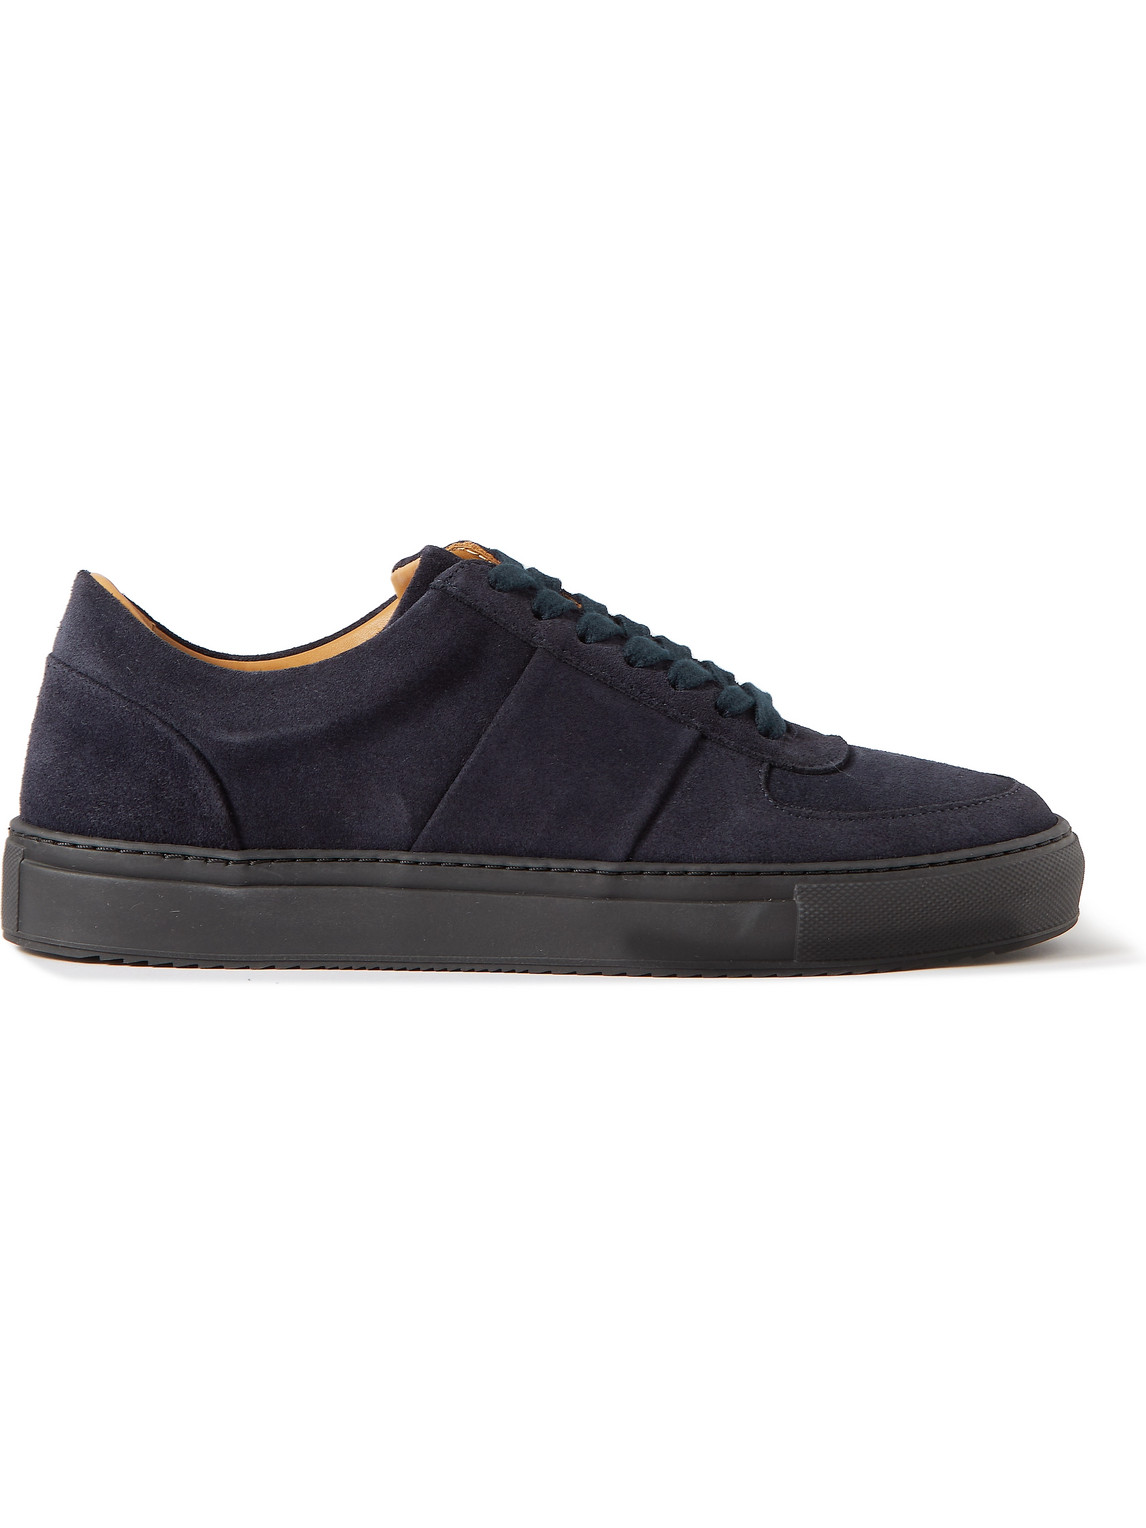 Mr P Larry Regenerated Suede By Evolo® Trainers In Blue